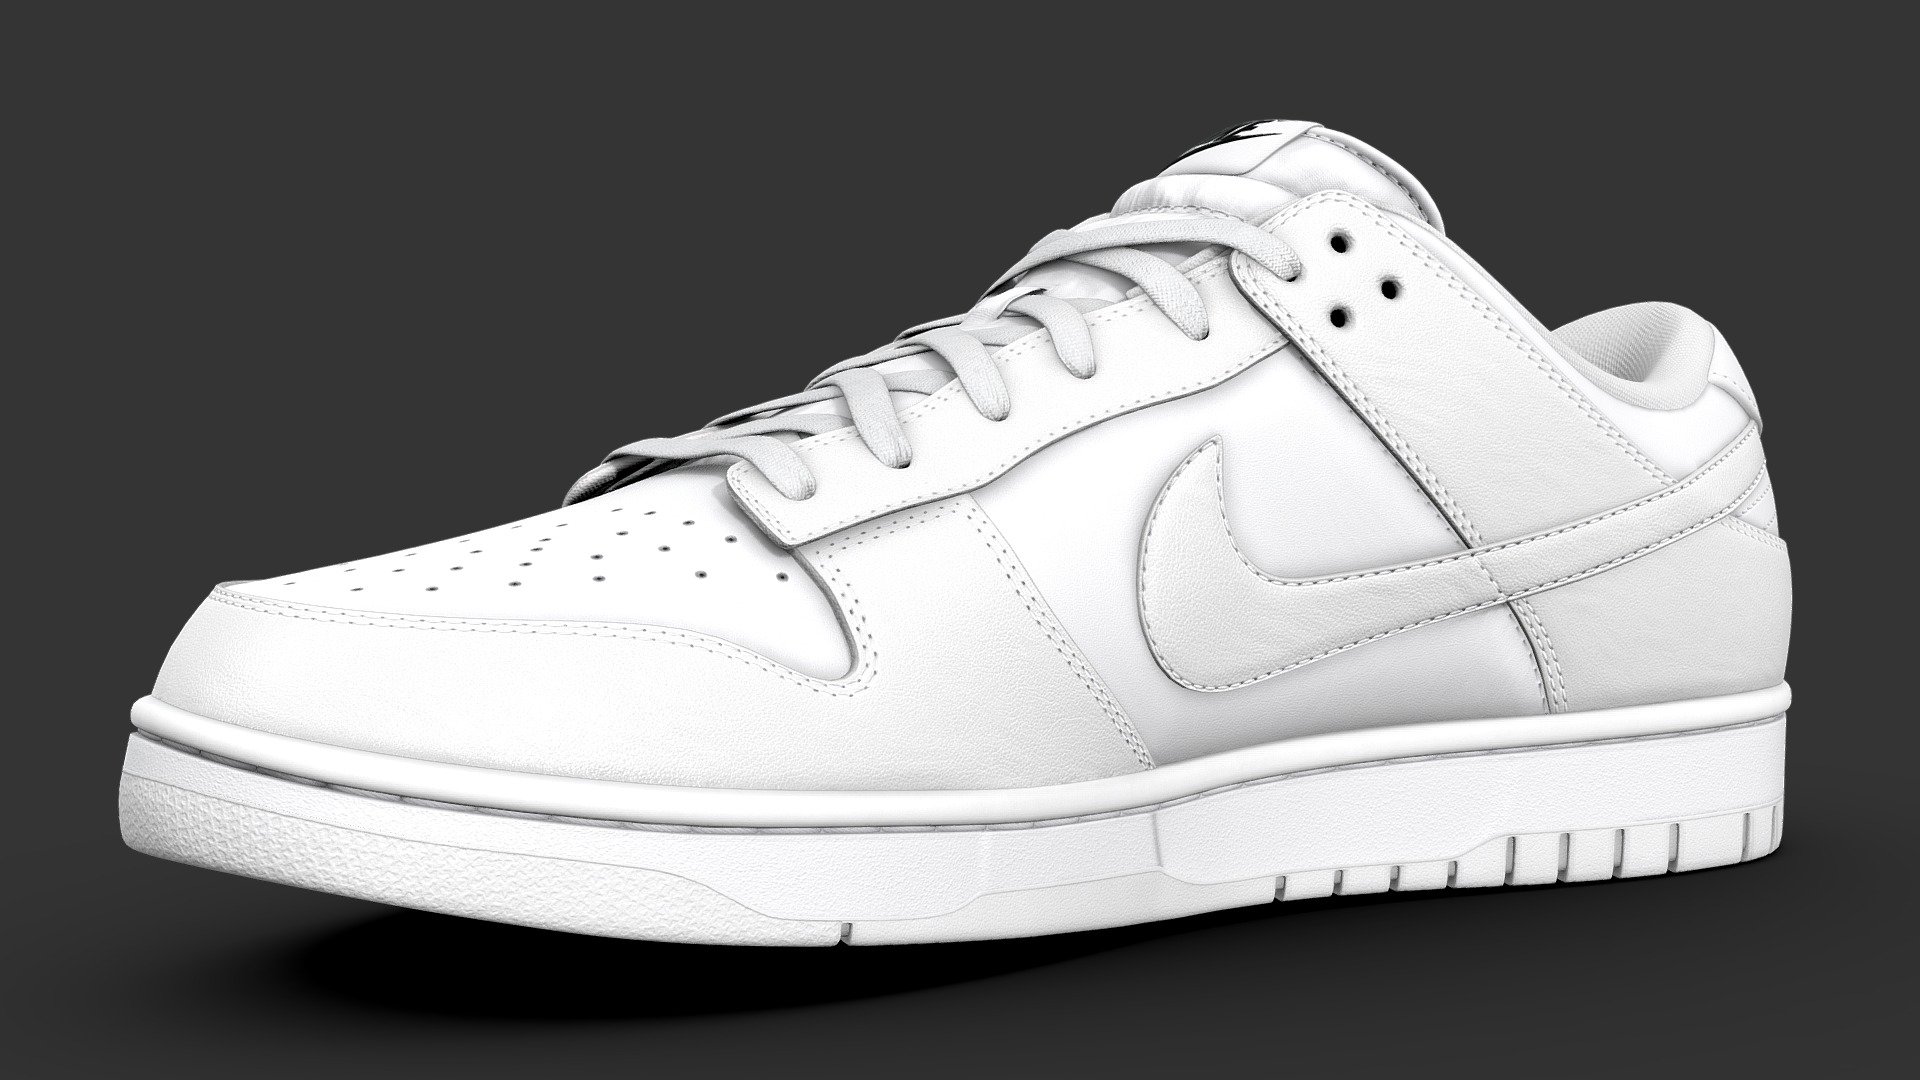 Nike Dunk Low in the Triple White Colourway. Every detail was made in the recreation of this shoe, from the text on the medial side of the shoe to the subtlety of each material, nothing went overlooked. Stitches were sculpted by hand to achieve the highest quality

What's included




Blender file with linked textures

FBX and OBJ versions

OneMesh version

All 4k textures

Model Features

The upmost care went into crafting this model. As a result it is subdivision ready. The model was unwrapped with efficiency in mind. Both left and right shoes are mostly identical, save for logos and text that cannot be mirrored. As such the high detail version of the shoe uses 4 UV maps to cover both of the shoes, with the One mesh version using just the one UV map 3d model